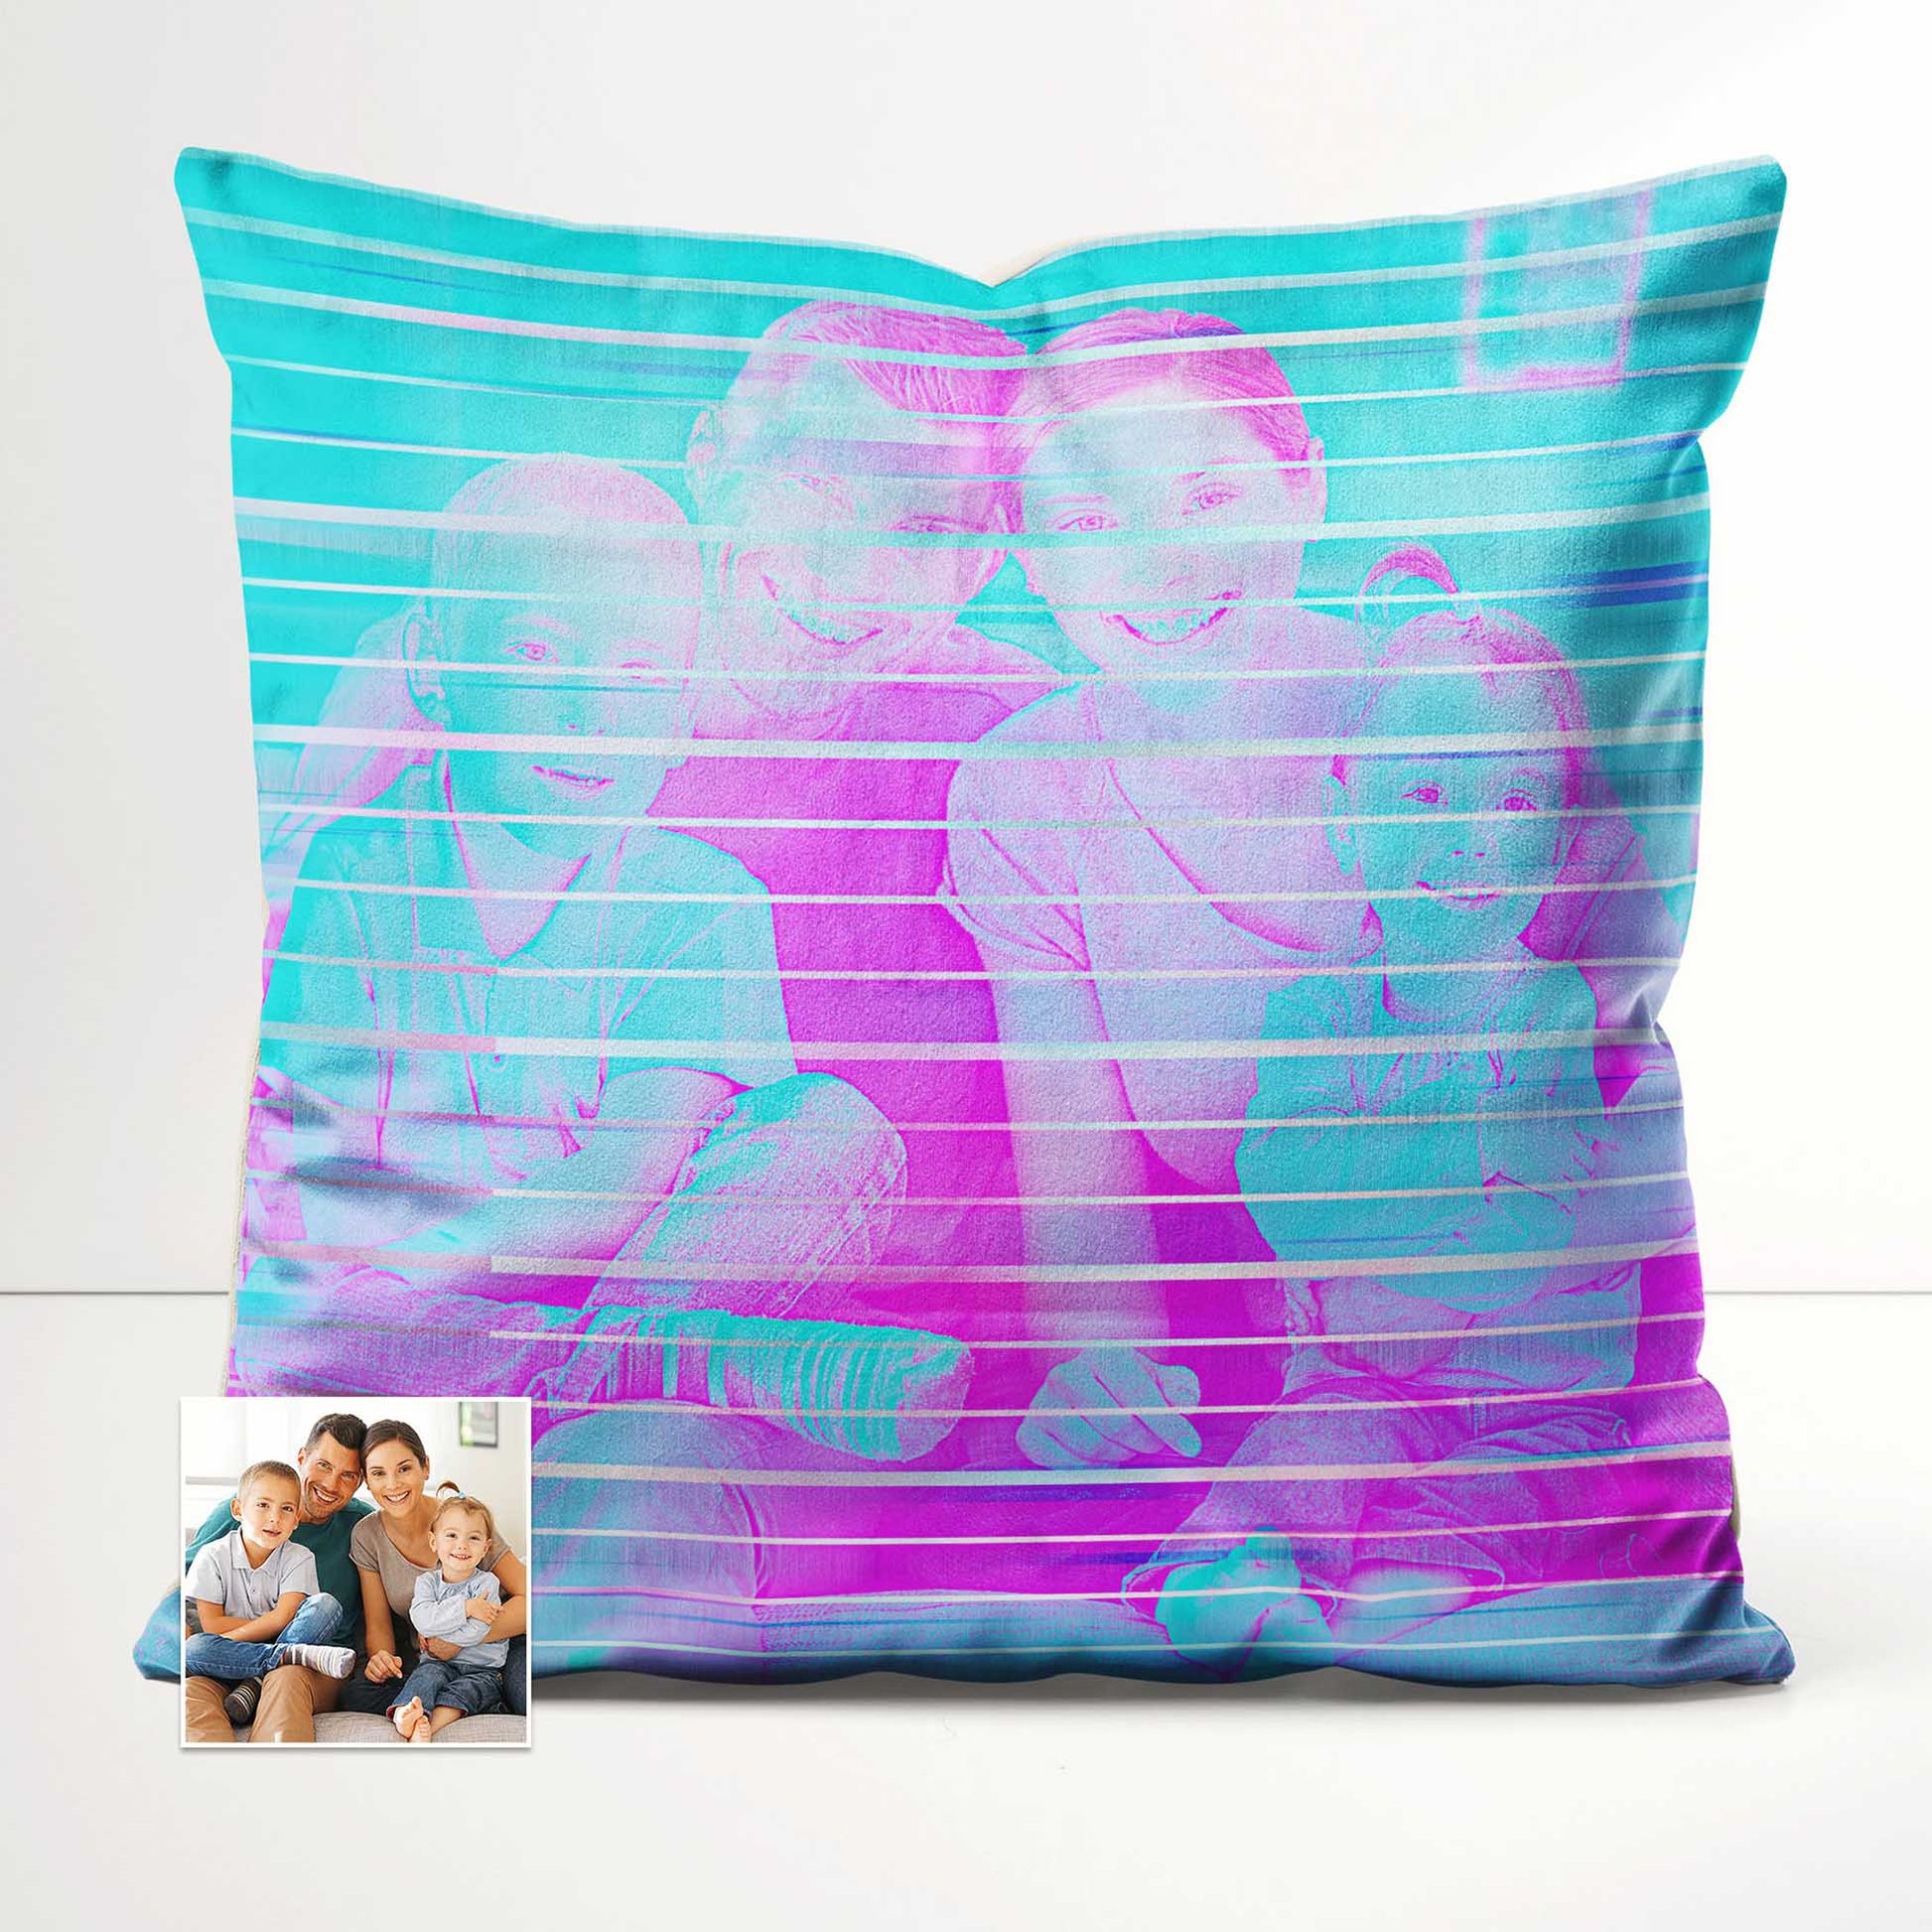 Add a burst of color to your space with the Personalised Purple and Blue Cushion. Its vibrant and vivid shades create a modern and elegant look that catches the eye. Made from soft velvet, this cushion offers a luxurious and comfortable 